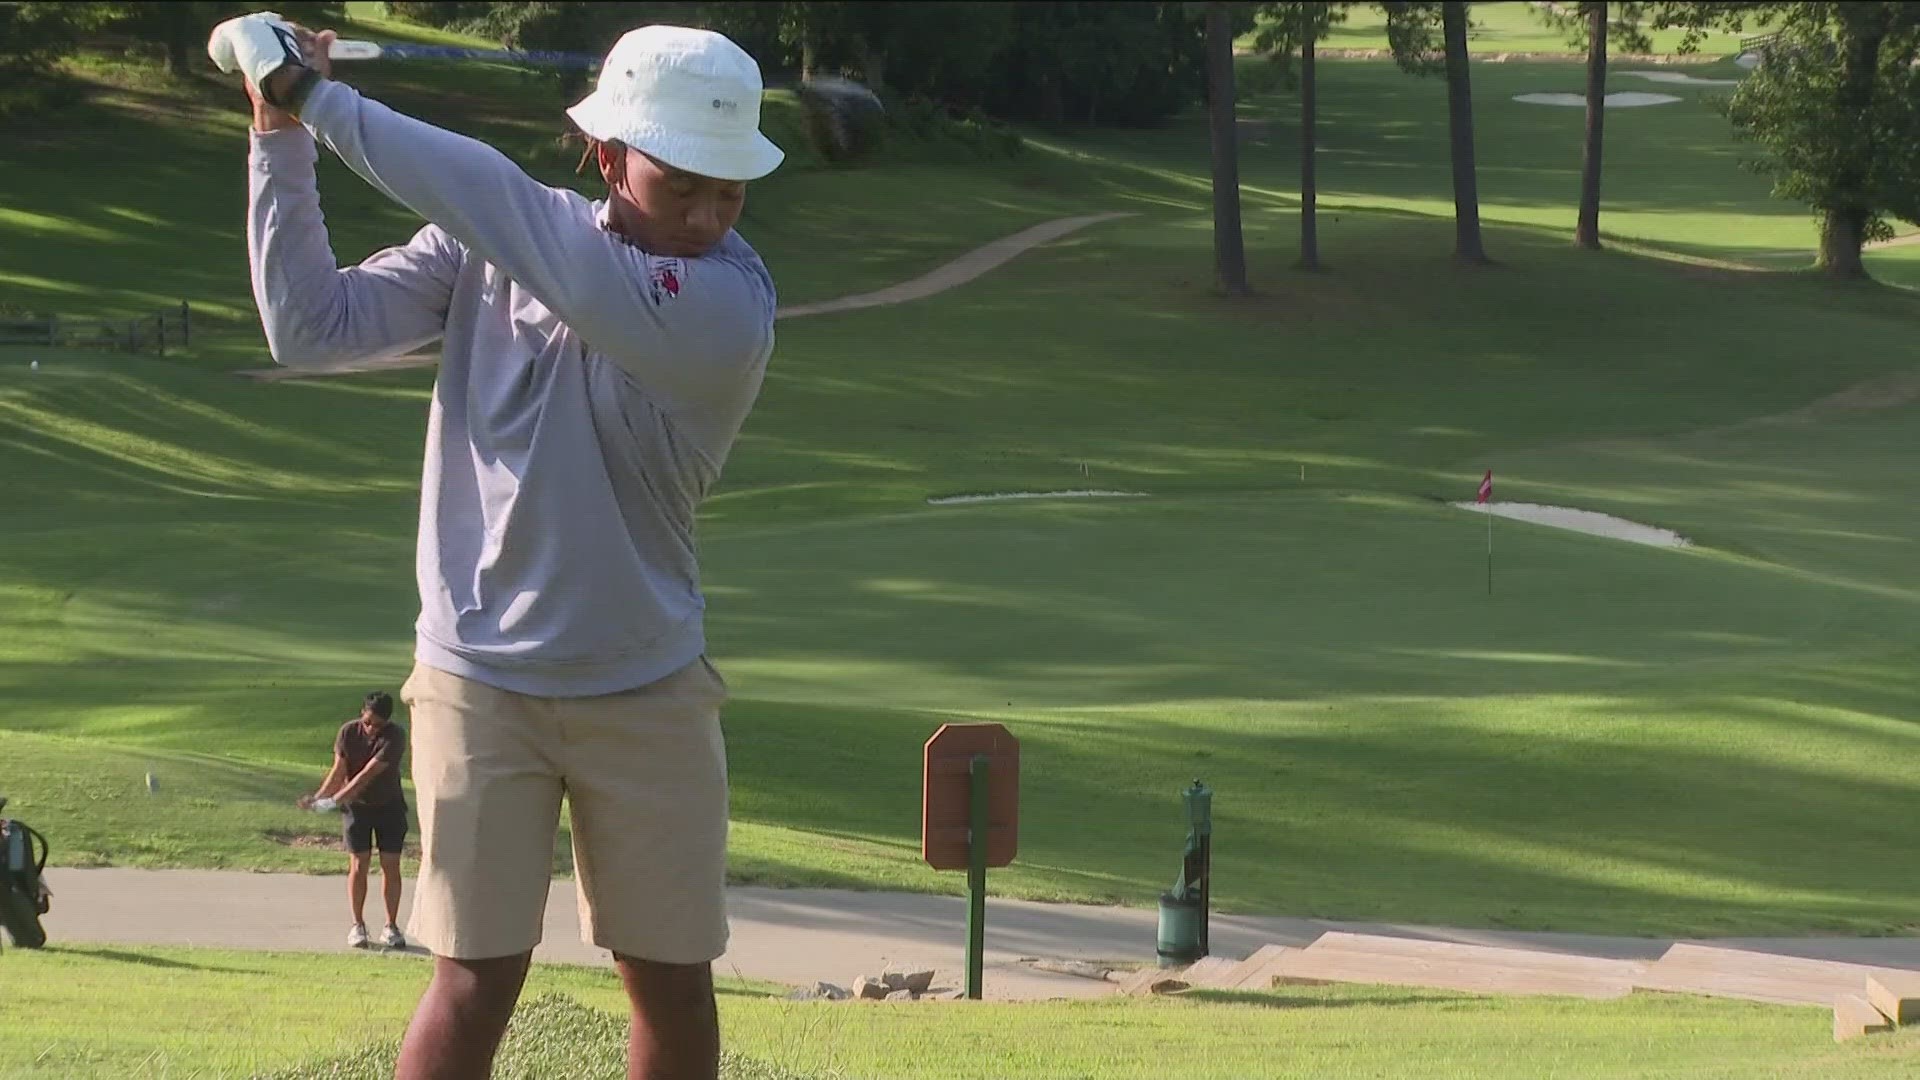 The Atlanta-based organization provides scholarships and clinics for young golfers.